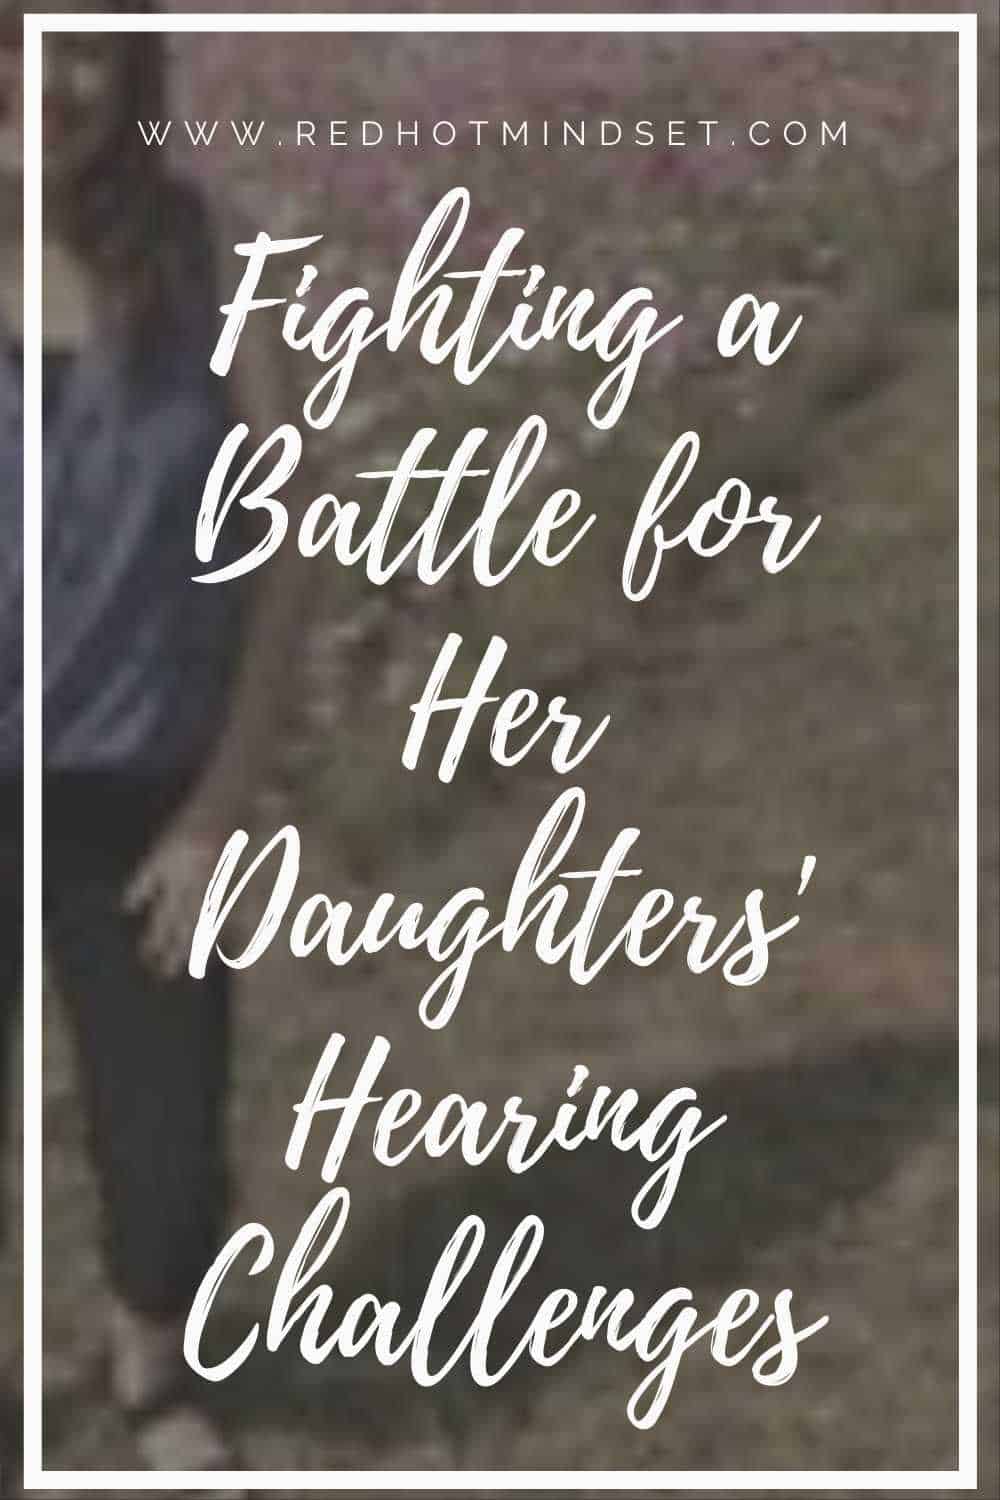 Fighting a Battle for Her Daughters’ Hearing Challenges